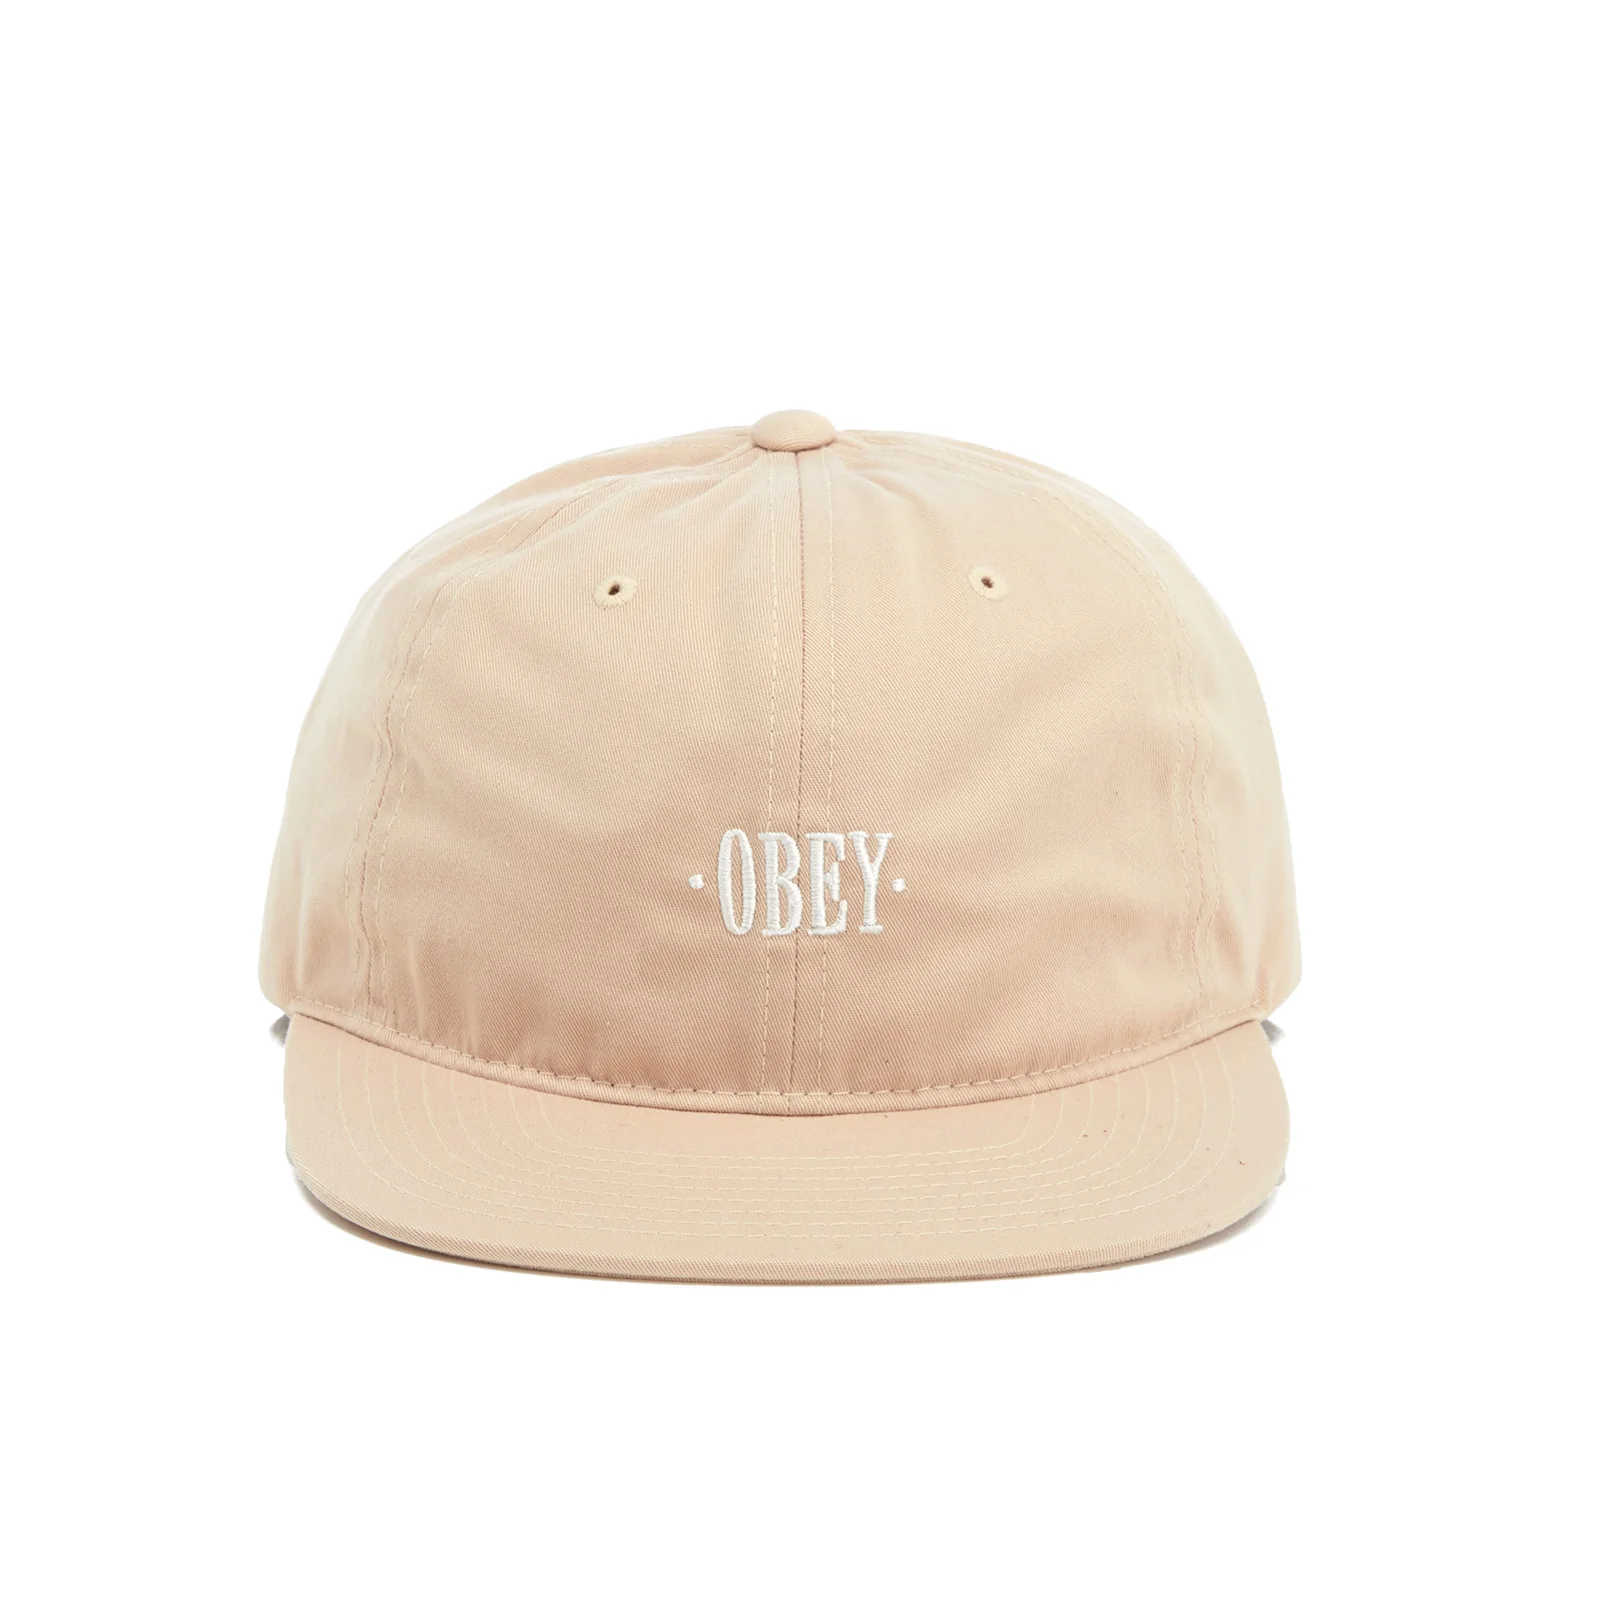 OBEY Clothing Men's Earl 6 Panel Hat - Cream Image 1